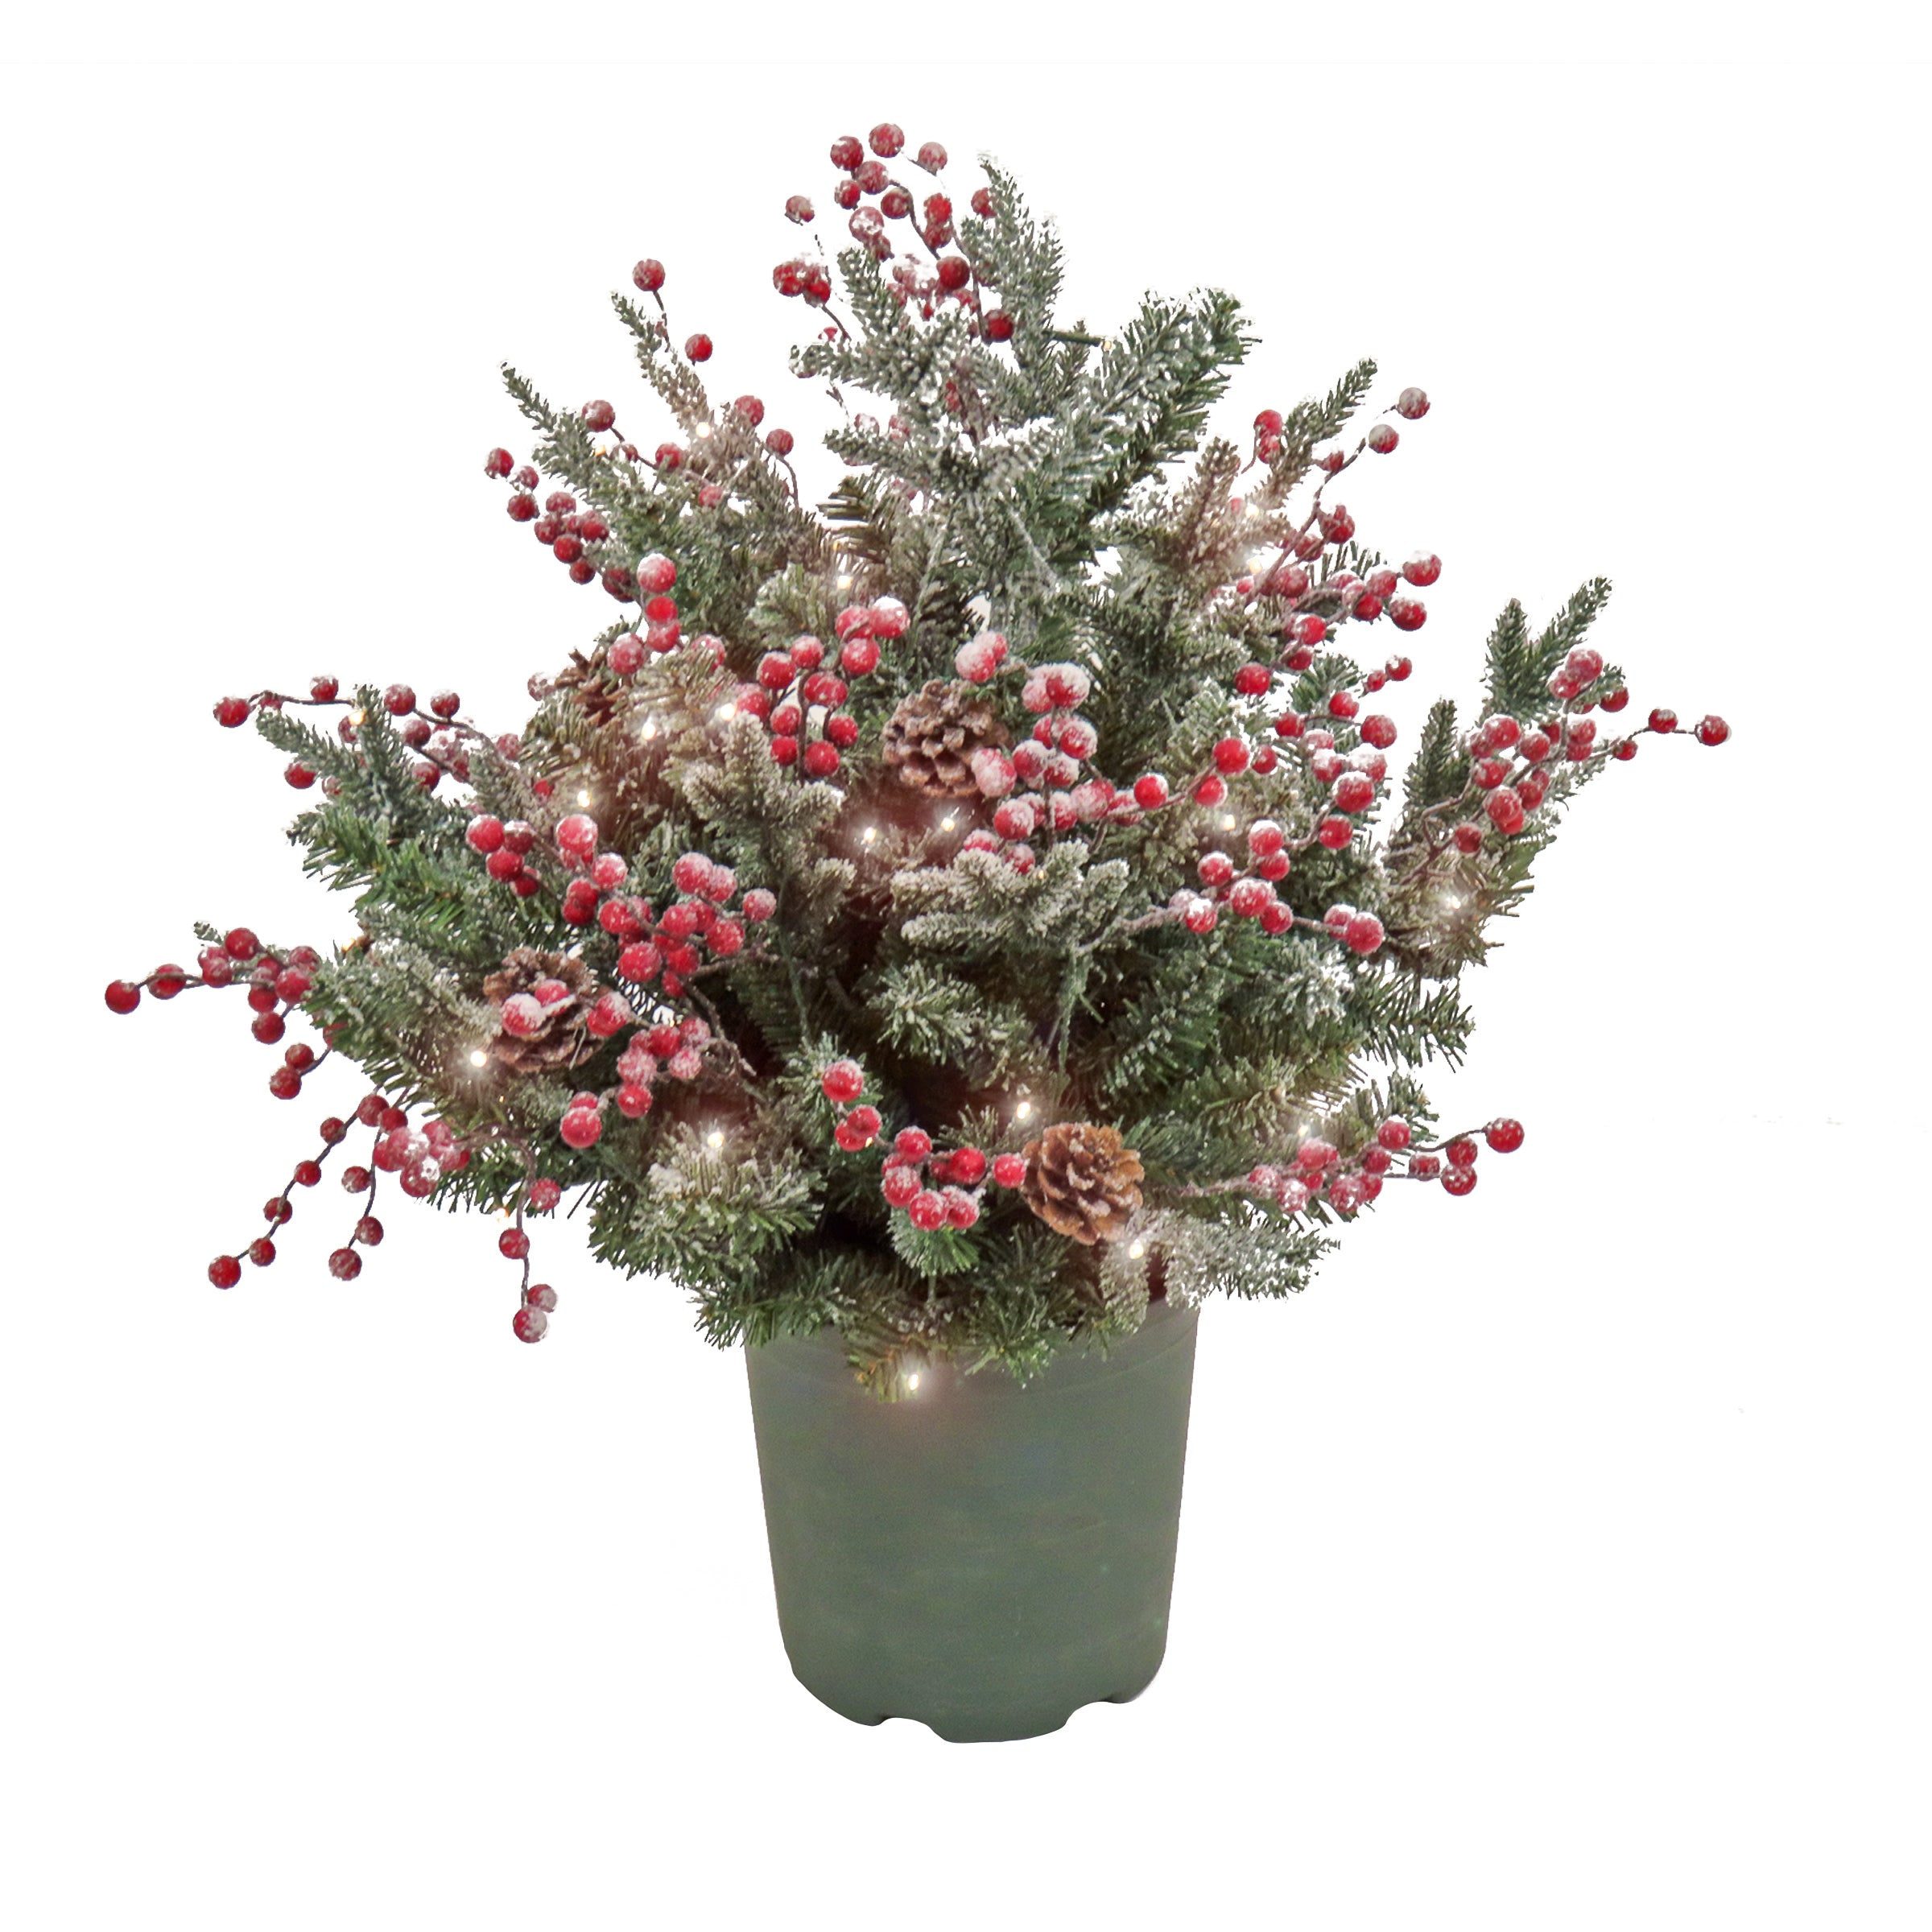 HGTV Home Collection Pre-Lit Holly and Berry Planter Filler